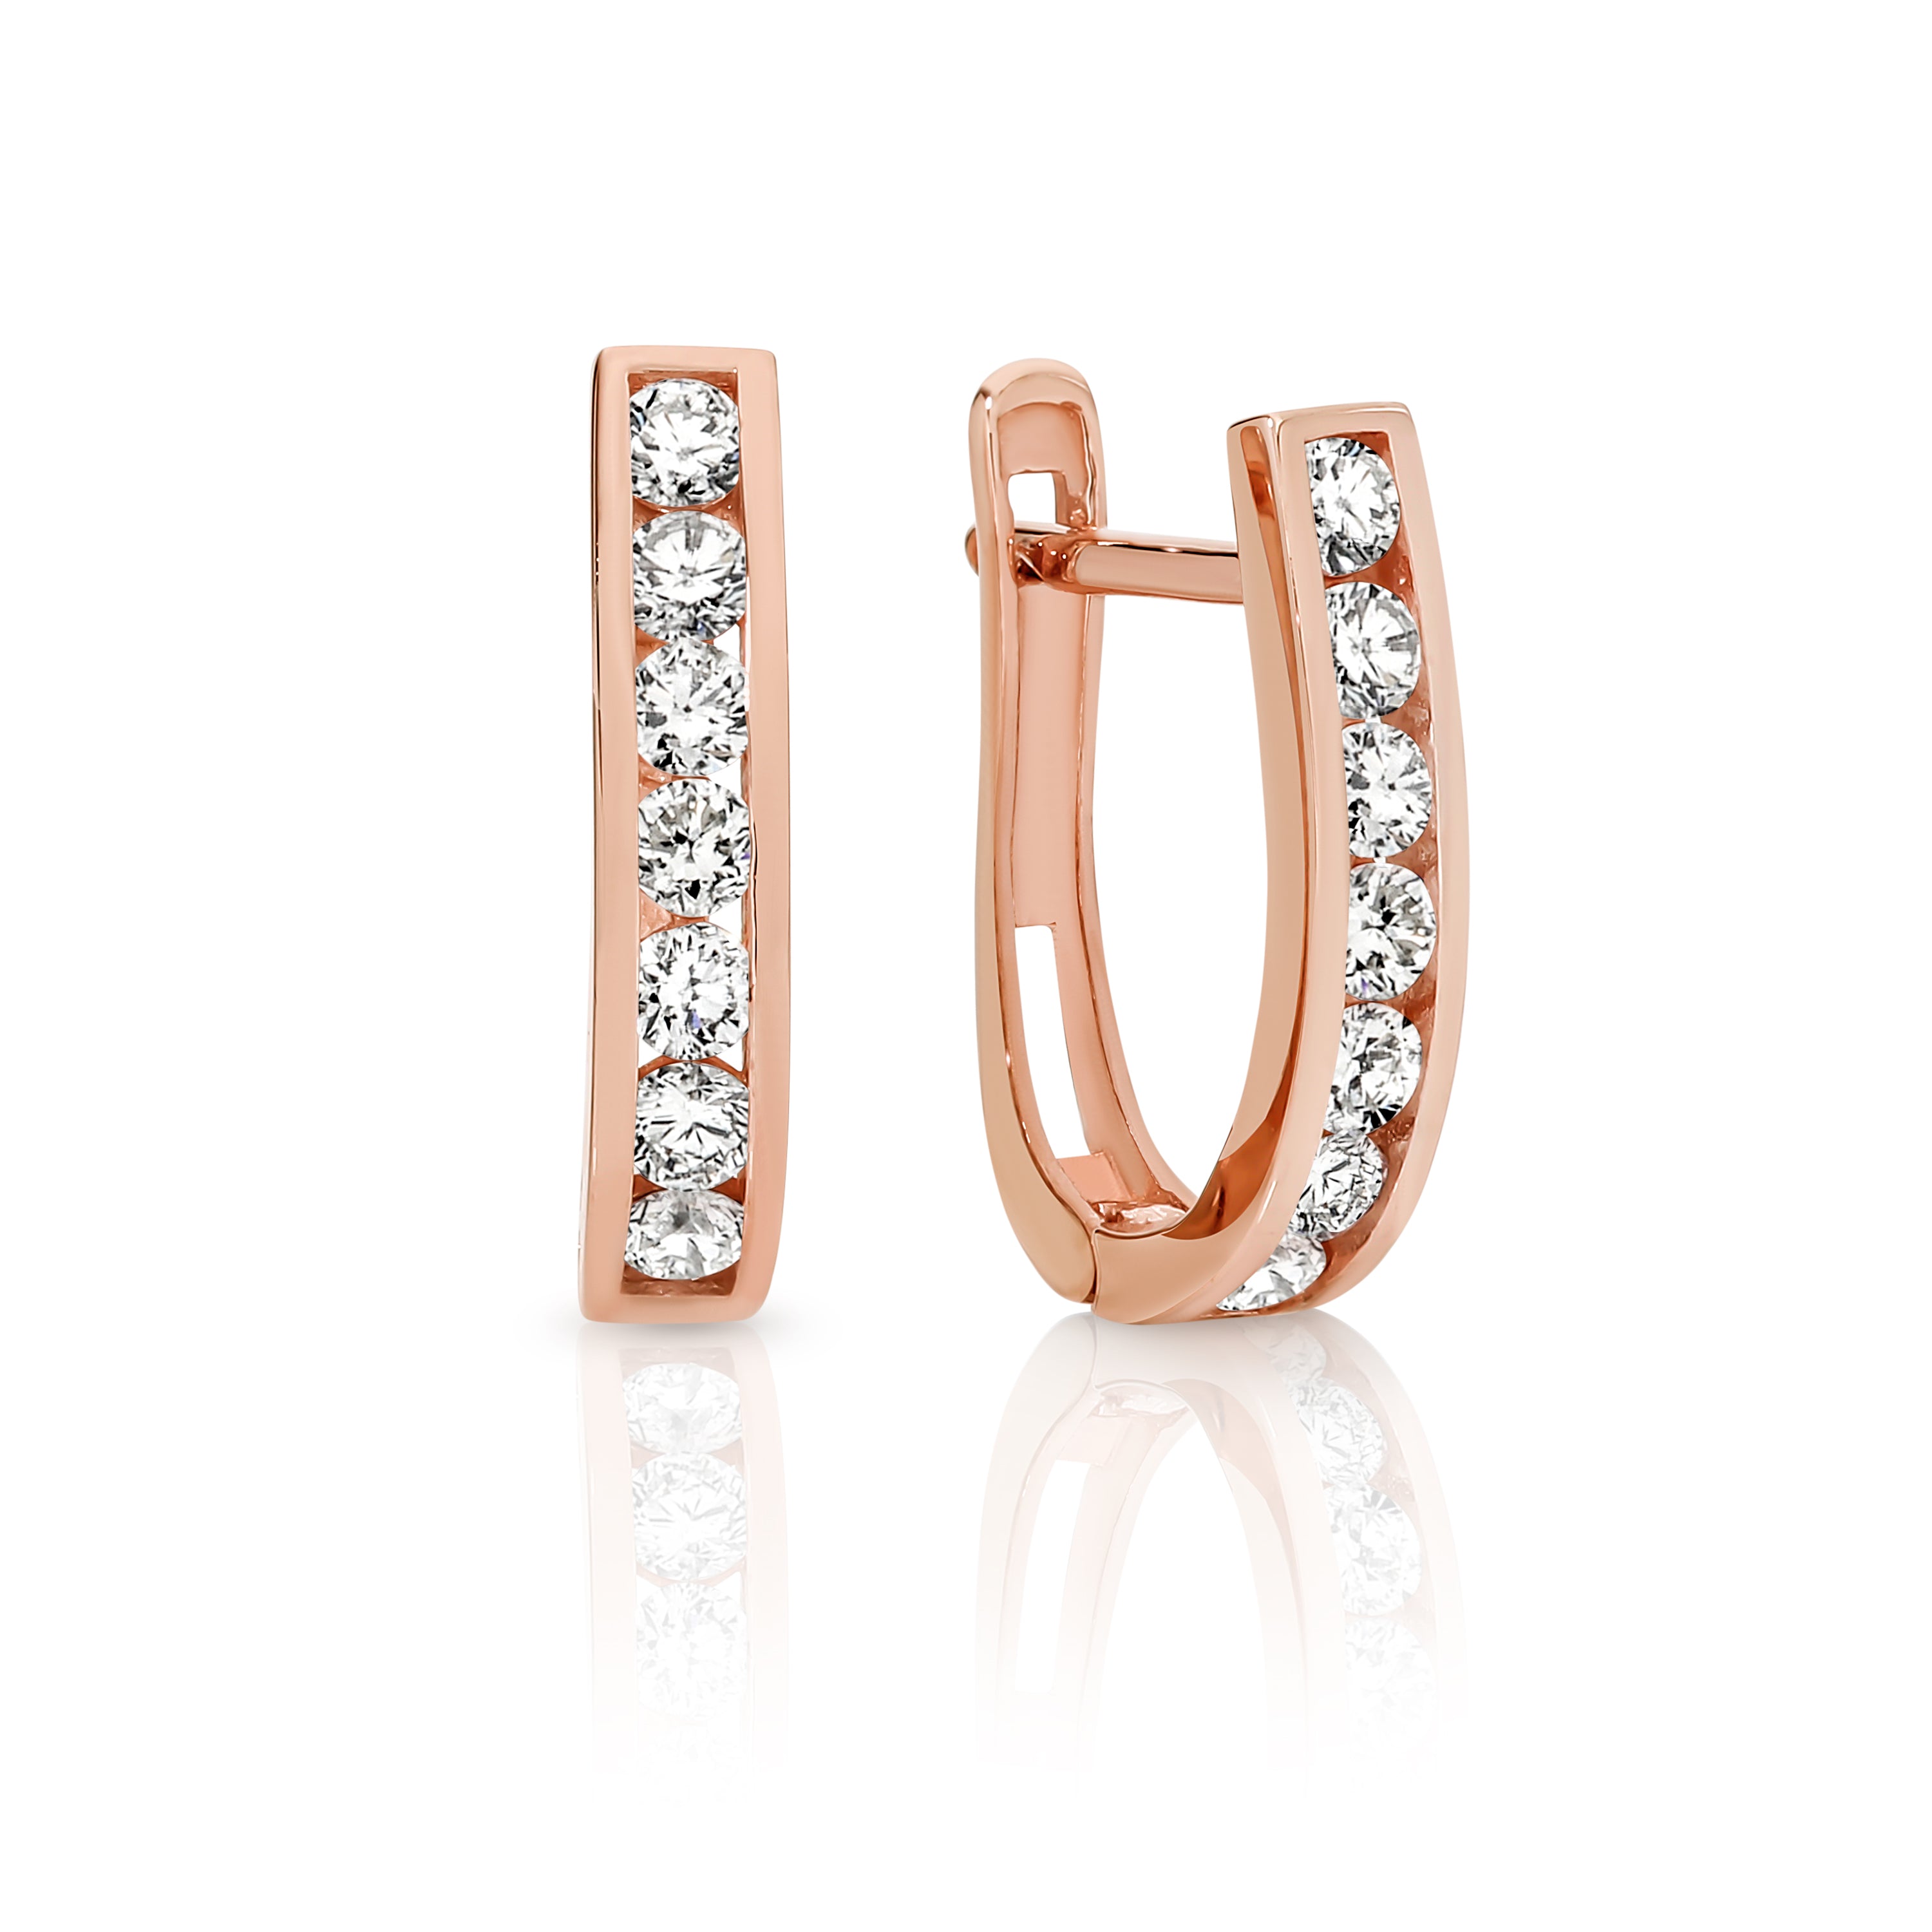 9ct rose gold oval channel huggies